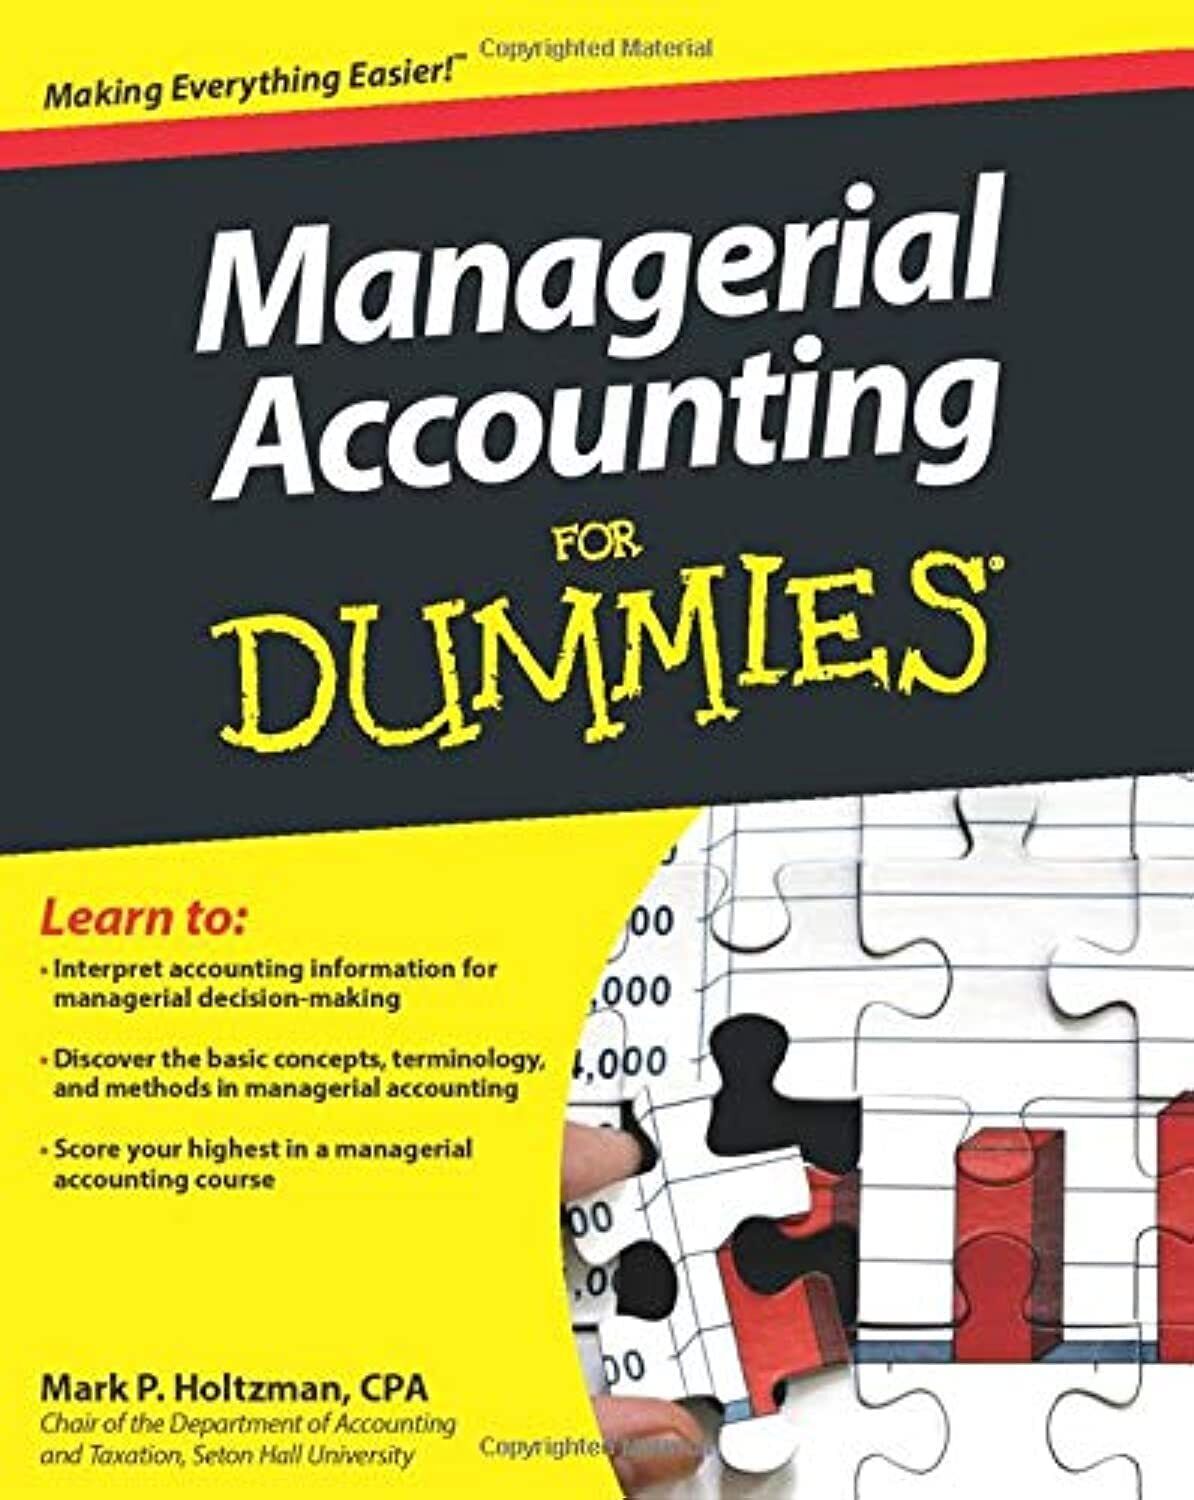 Managerial Accounting for Dummies (Bargain Book)